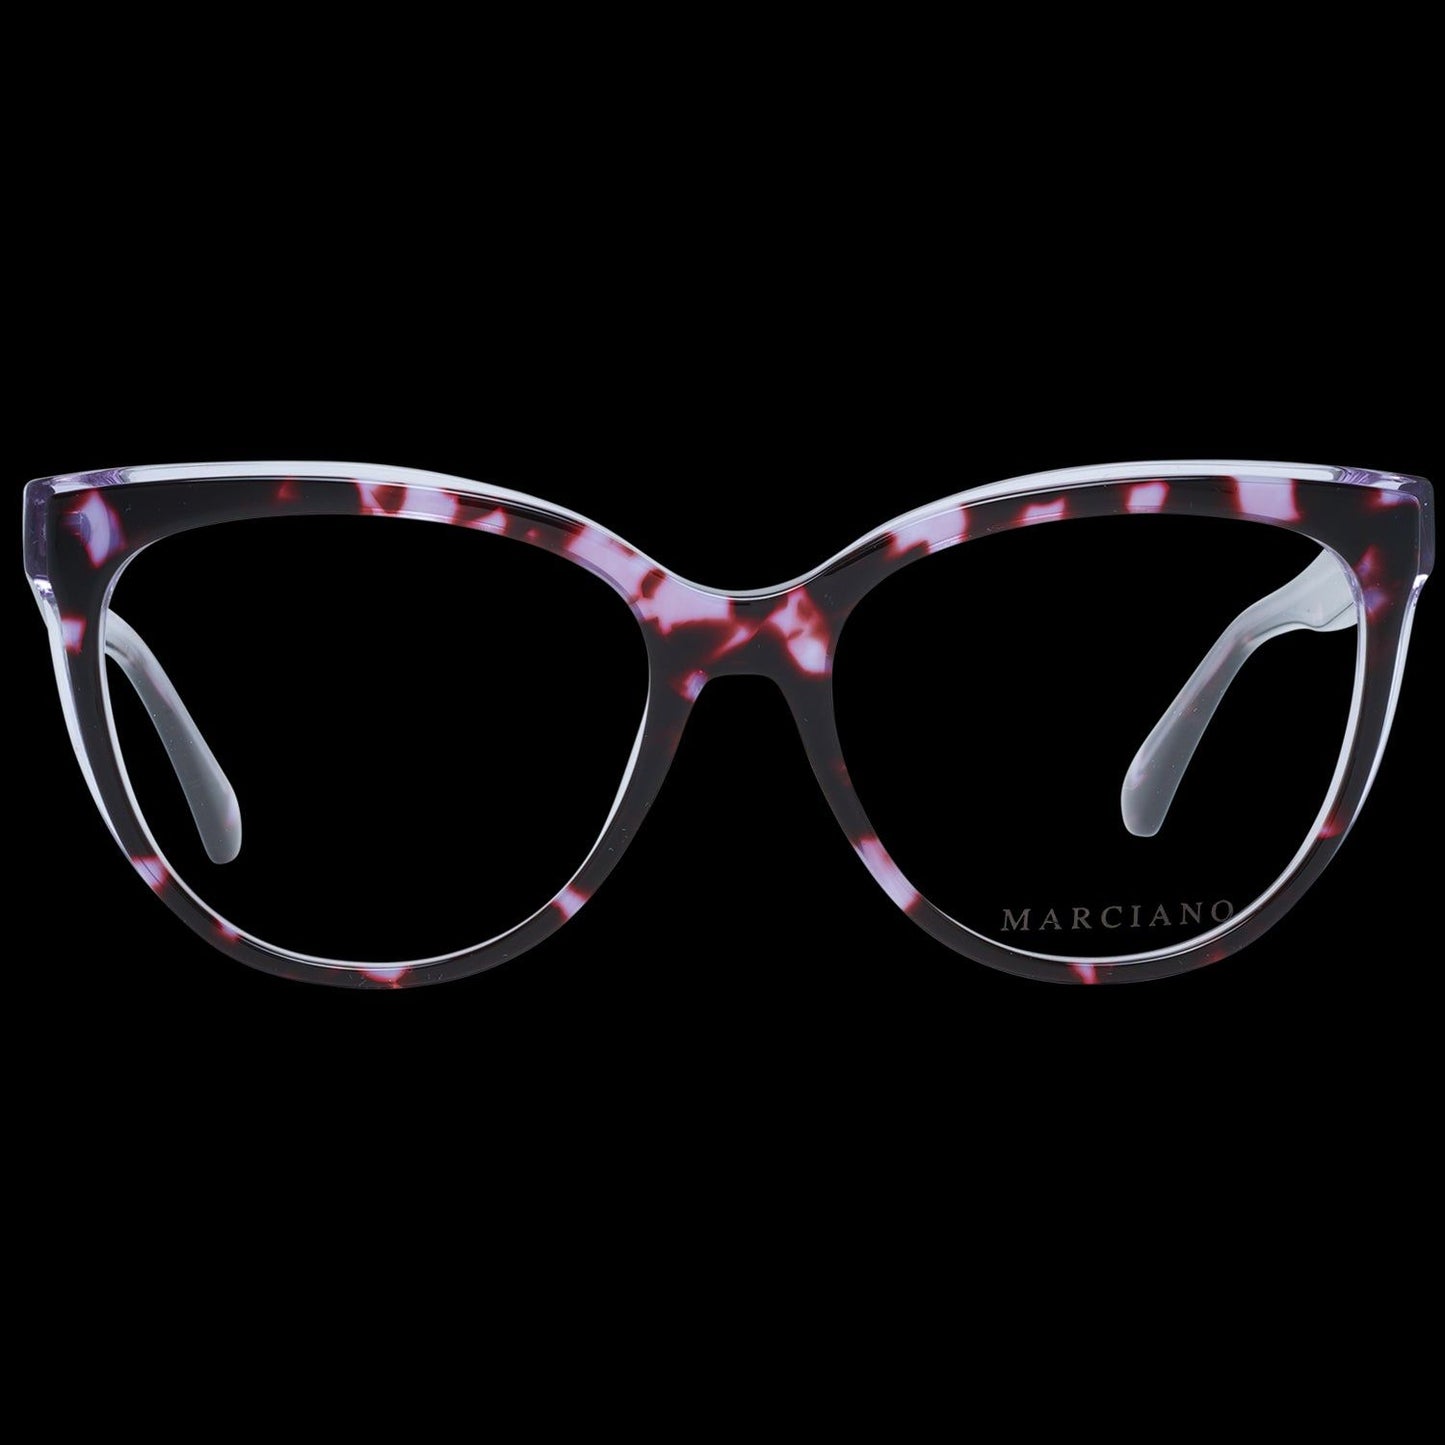 MARCIANO By GUESS EYEWEARMARCIANO BY GUESS MOD. GM0377 54083McRichard Designer Brands£106.00